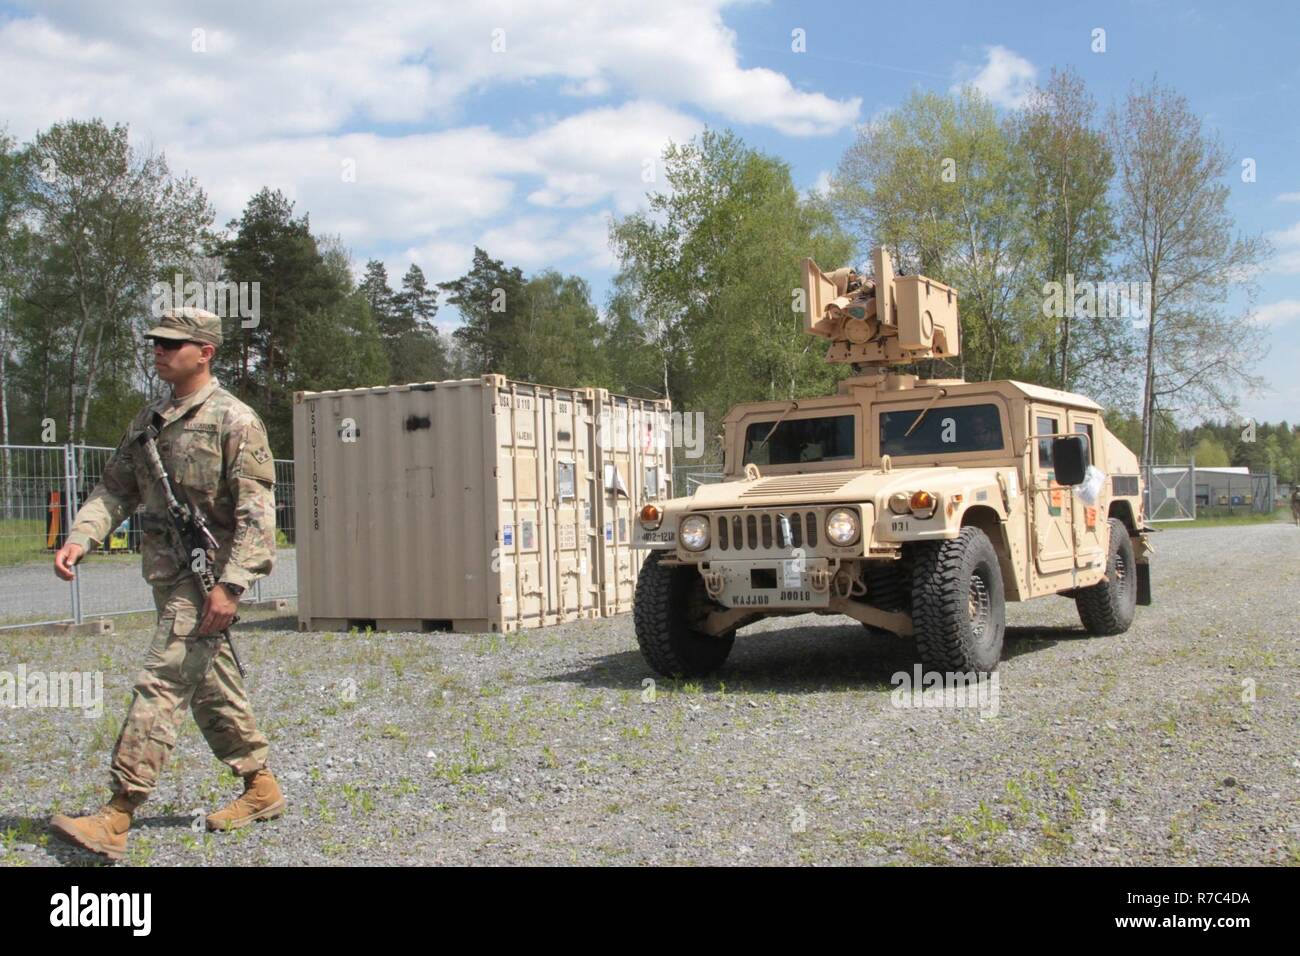 Pfc. Brian Choi, a medic with Company D, 2nd Battalion, 12th Infantry Regiment, 2nd Infantry Brigade Combat Team, 4th Infantry Division, guides a High Mobility Multipurpose Wheeled Vehicle (HMMWV) into a loading yard to download equipment at Camp Kasserine, Grafenwoehr Training Area, Germany on May 17th, 2017. All of the HMMWVs of the 2-12th come loaded with necessary cargo that will allow soldiers to hit the ground running. The 2-12 IN Soldiers flew to Europe with only two weeks of advance notice for an emergency deployment readiness exercise, which showcases the US Army's ability to move tro Stock Photo